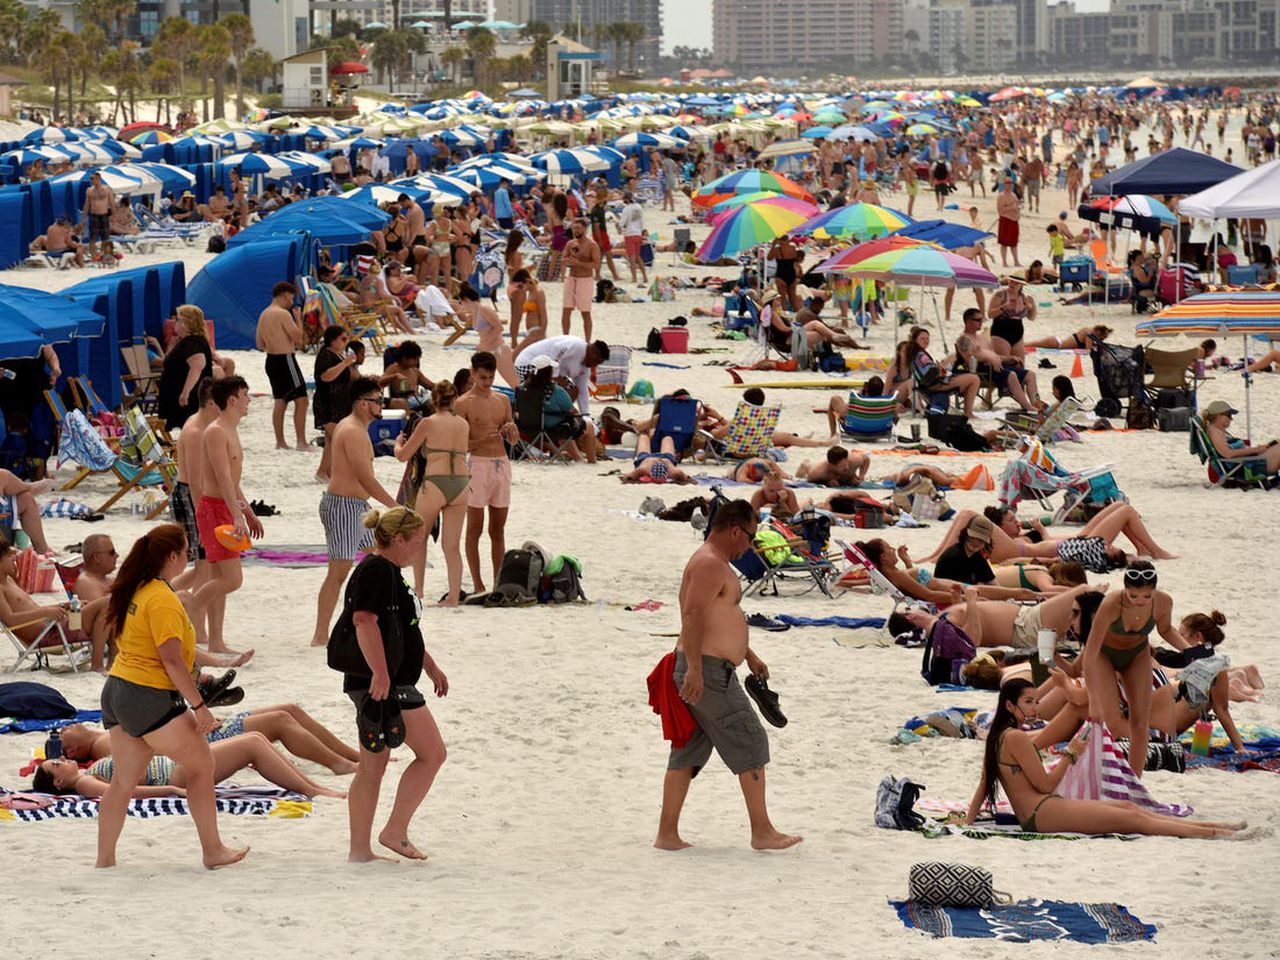 Florida reports 15,299 cases in a record single-day spike